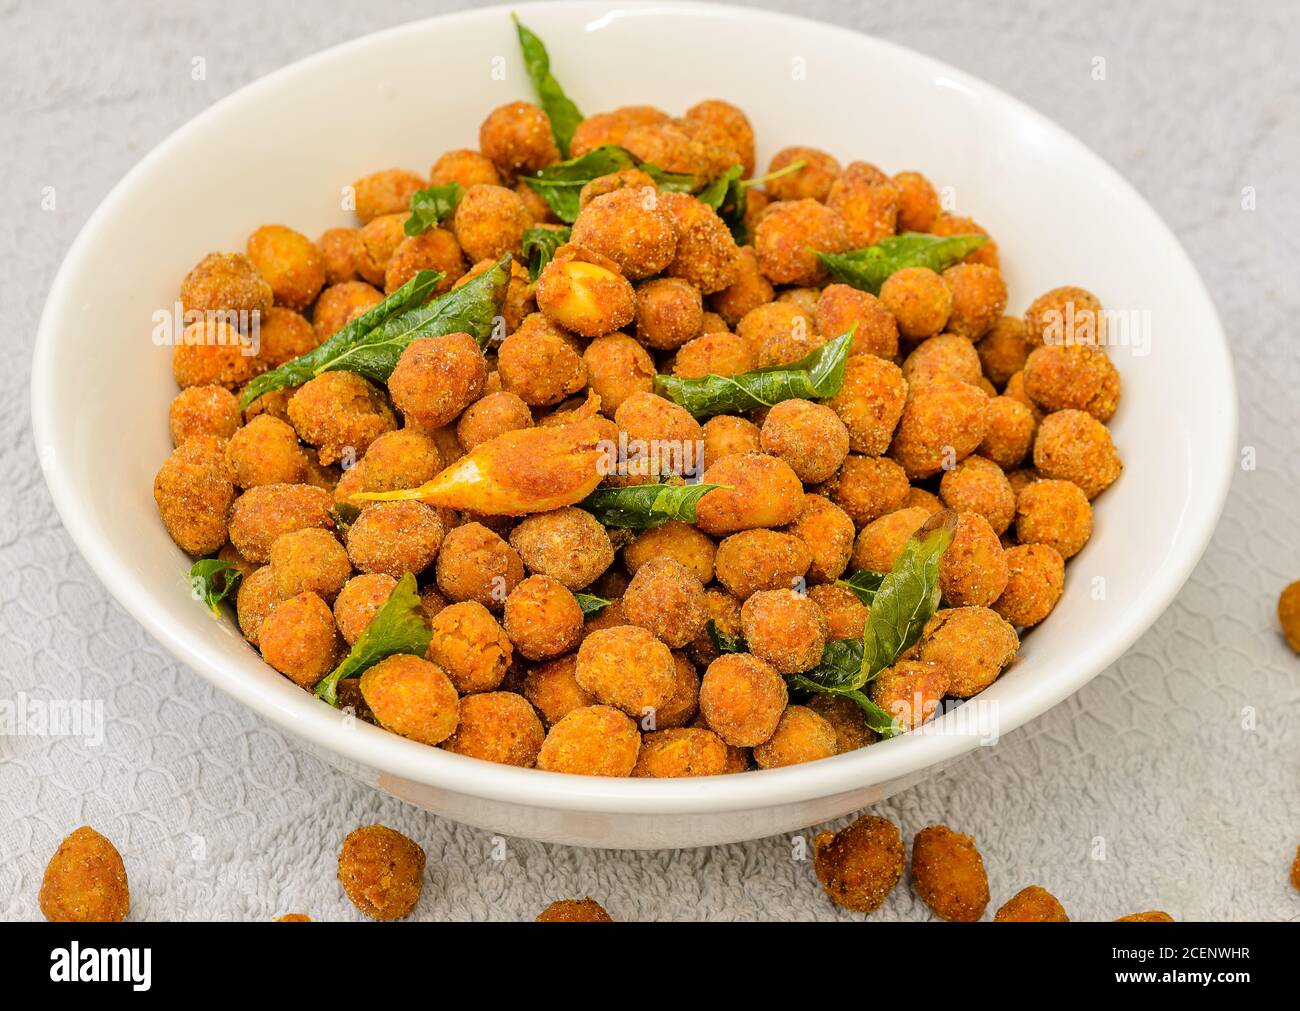 Peanuts Covered in Spices Deep Fried with Curry Leaves and Garlic in a bowl Stock Photo